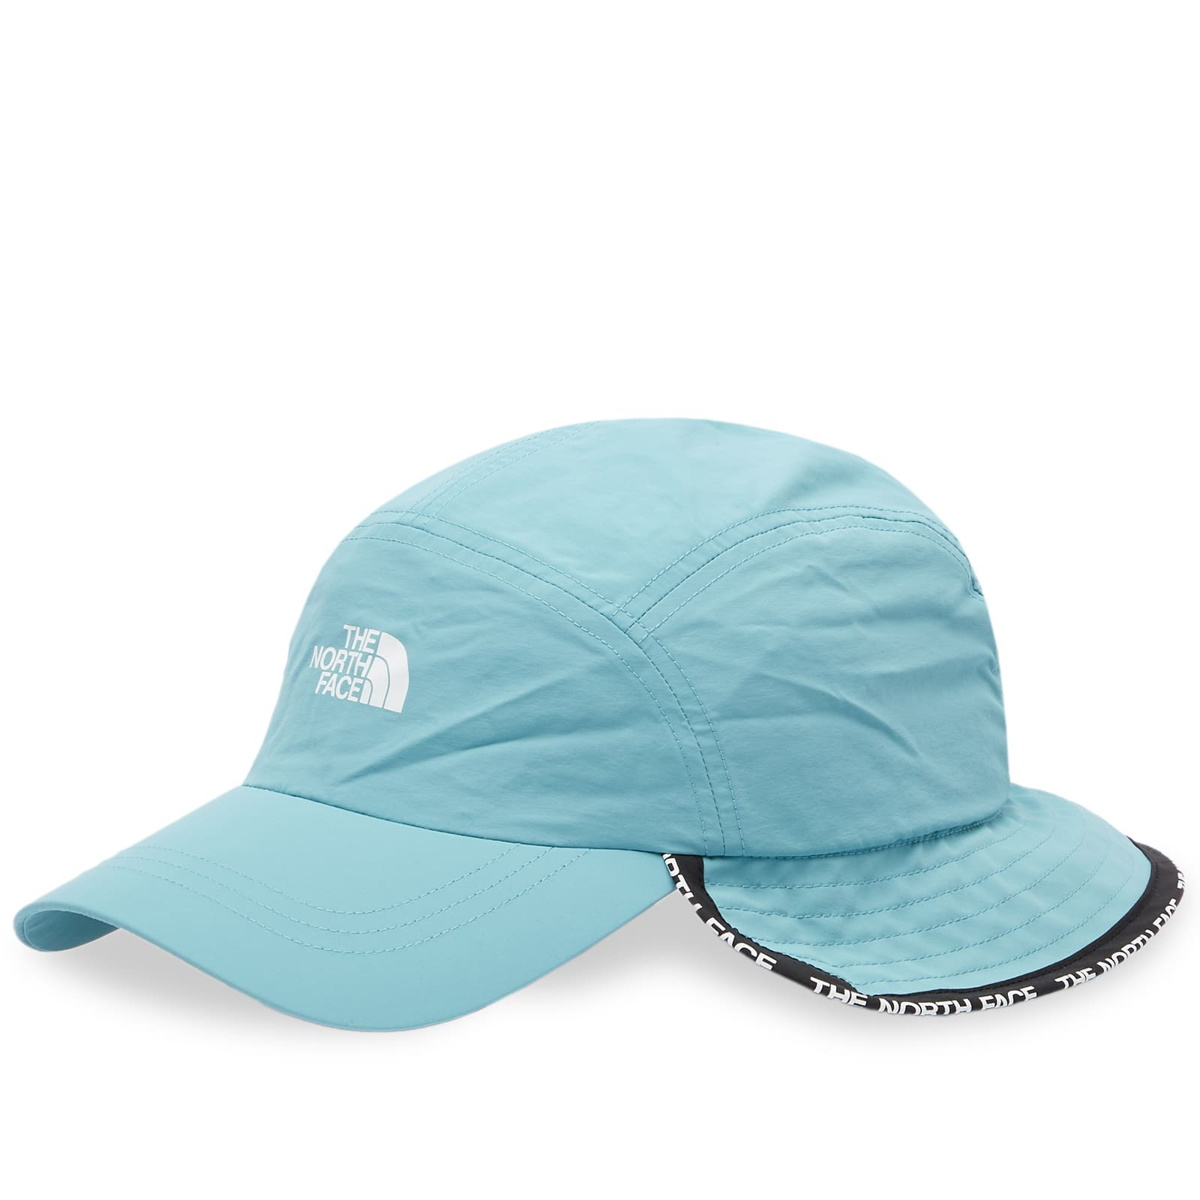 The North Face Men's Cypress Sunshield Cap in Reef Waters The North Face